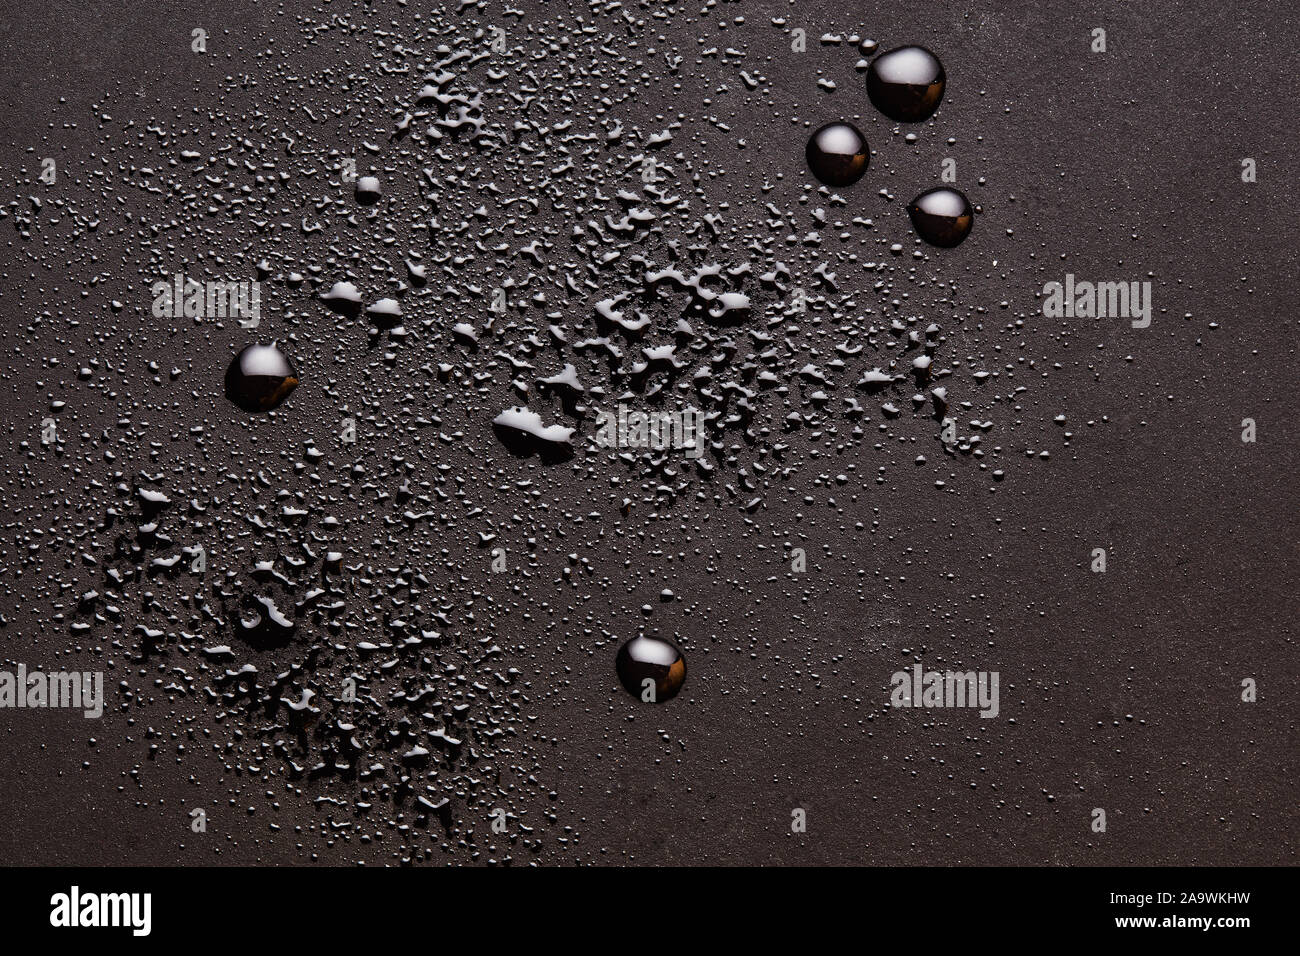 Shiny water drops on a dark brown moody surface. Abstract background with close up overhead view. Stock Photo